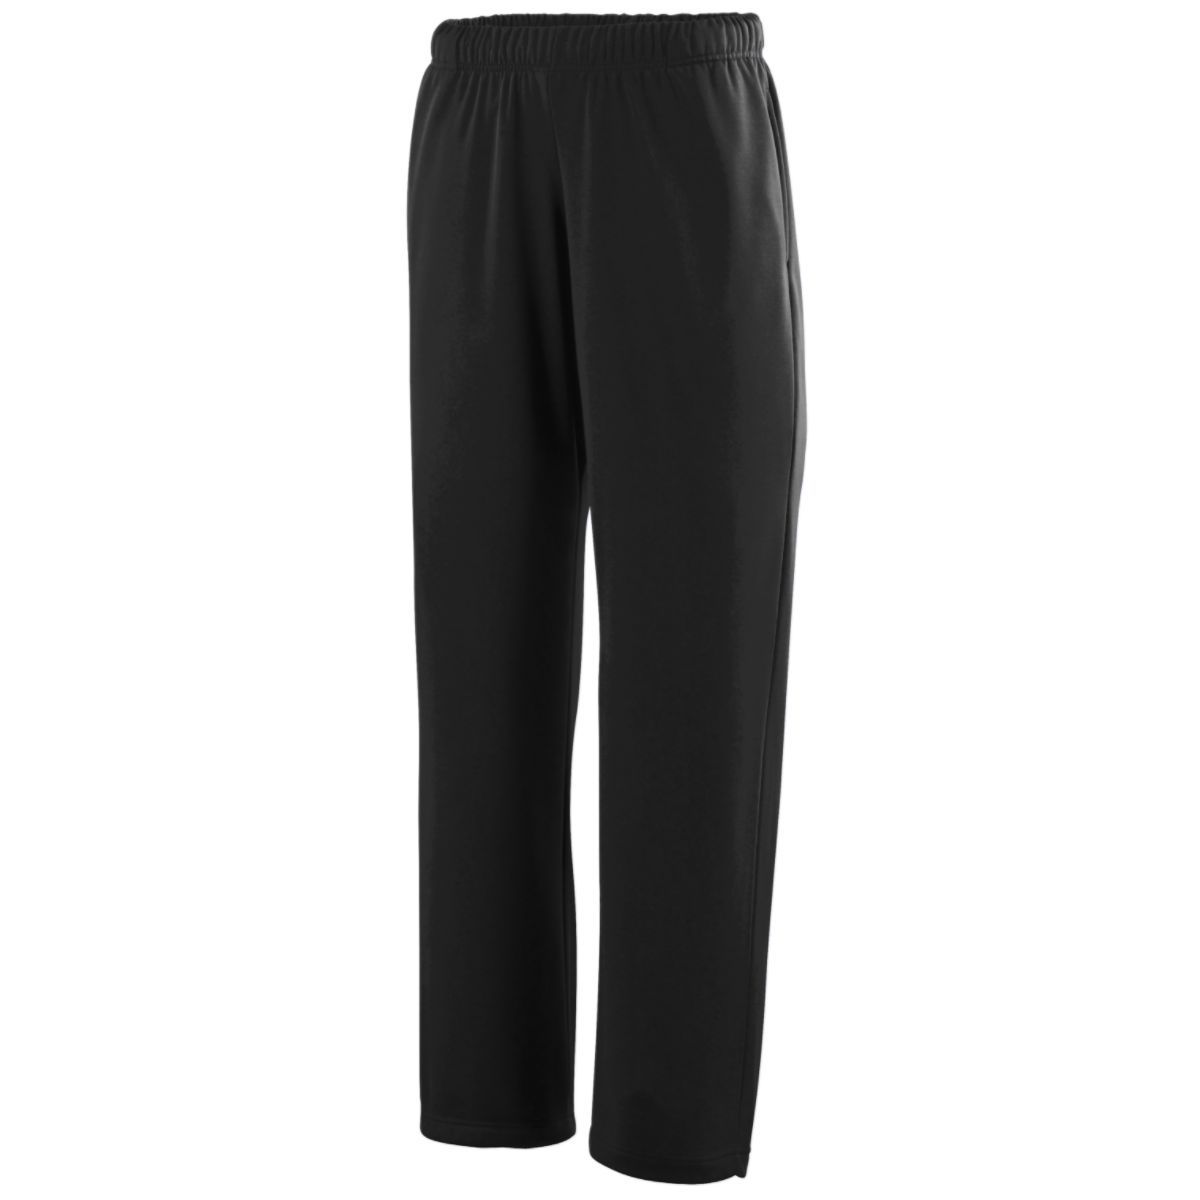 Augusta Sportswear Wicking Fleece Sweatpant in Black  -Part of the Adult, Adult-Pants, Pants, Augusta-Products product lines at KanaleyCreations.com